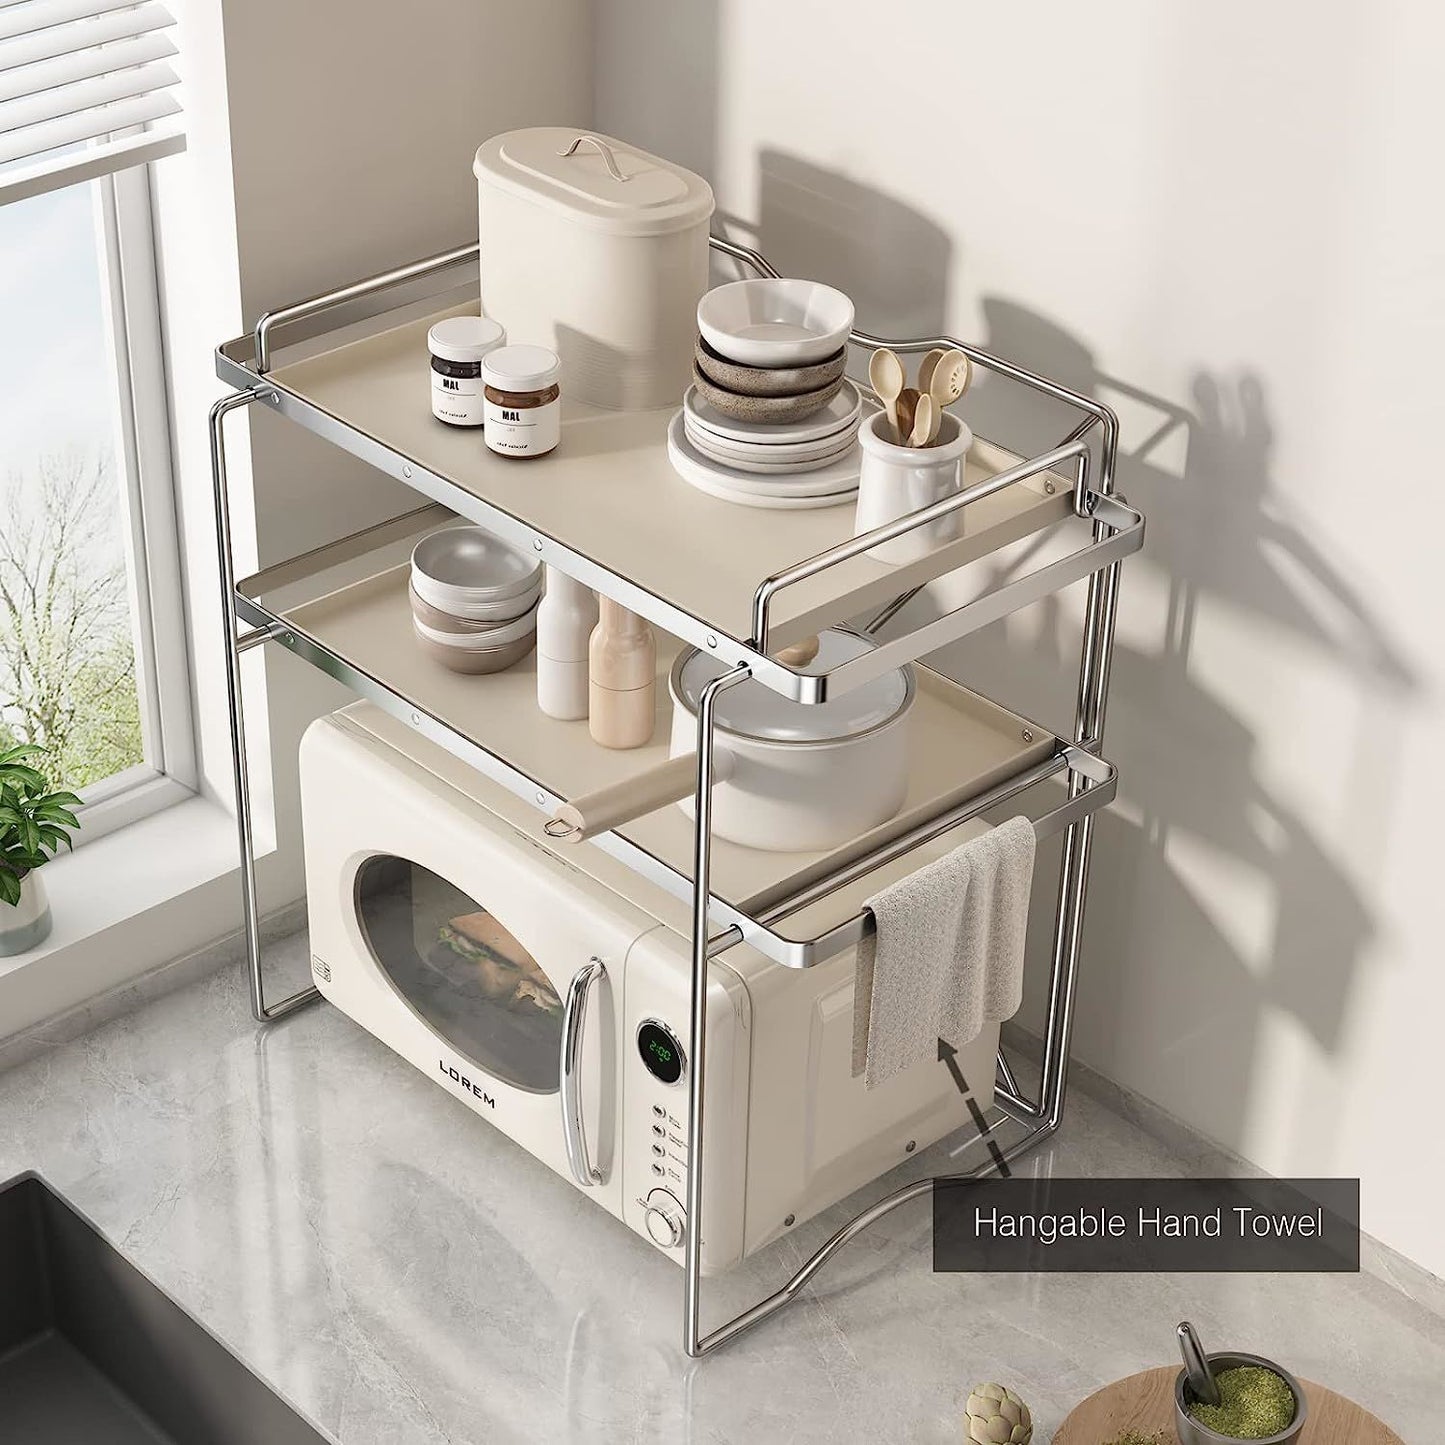 Microwave Shelf with Serving Tray